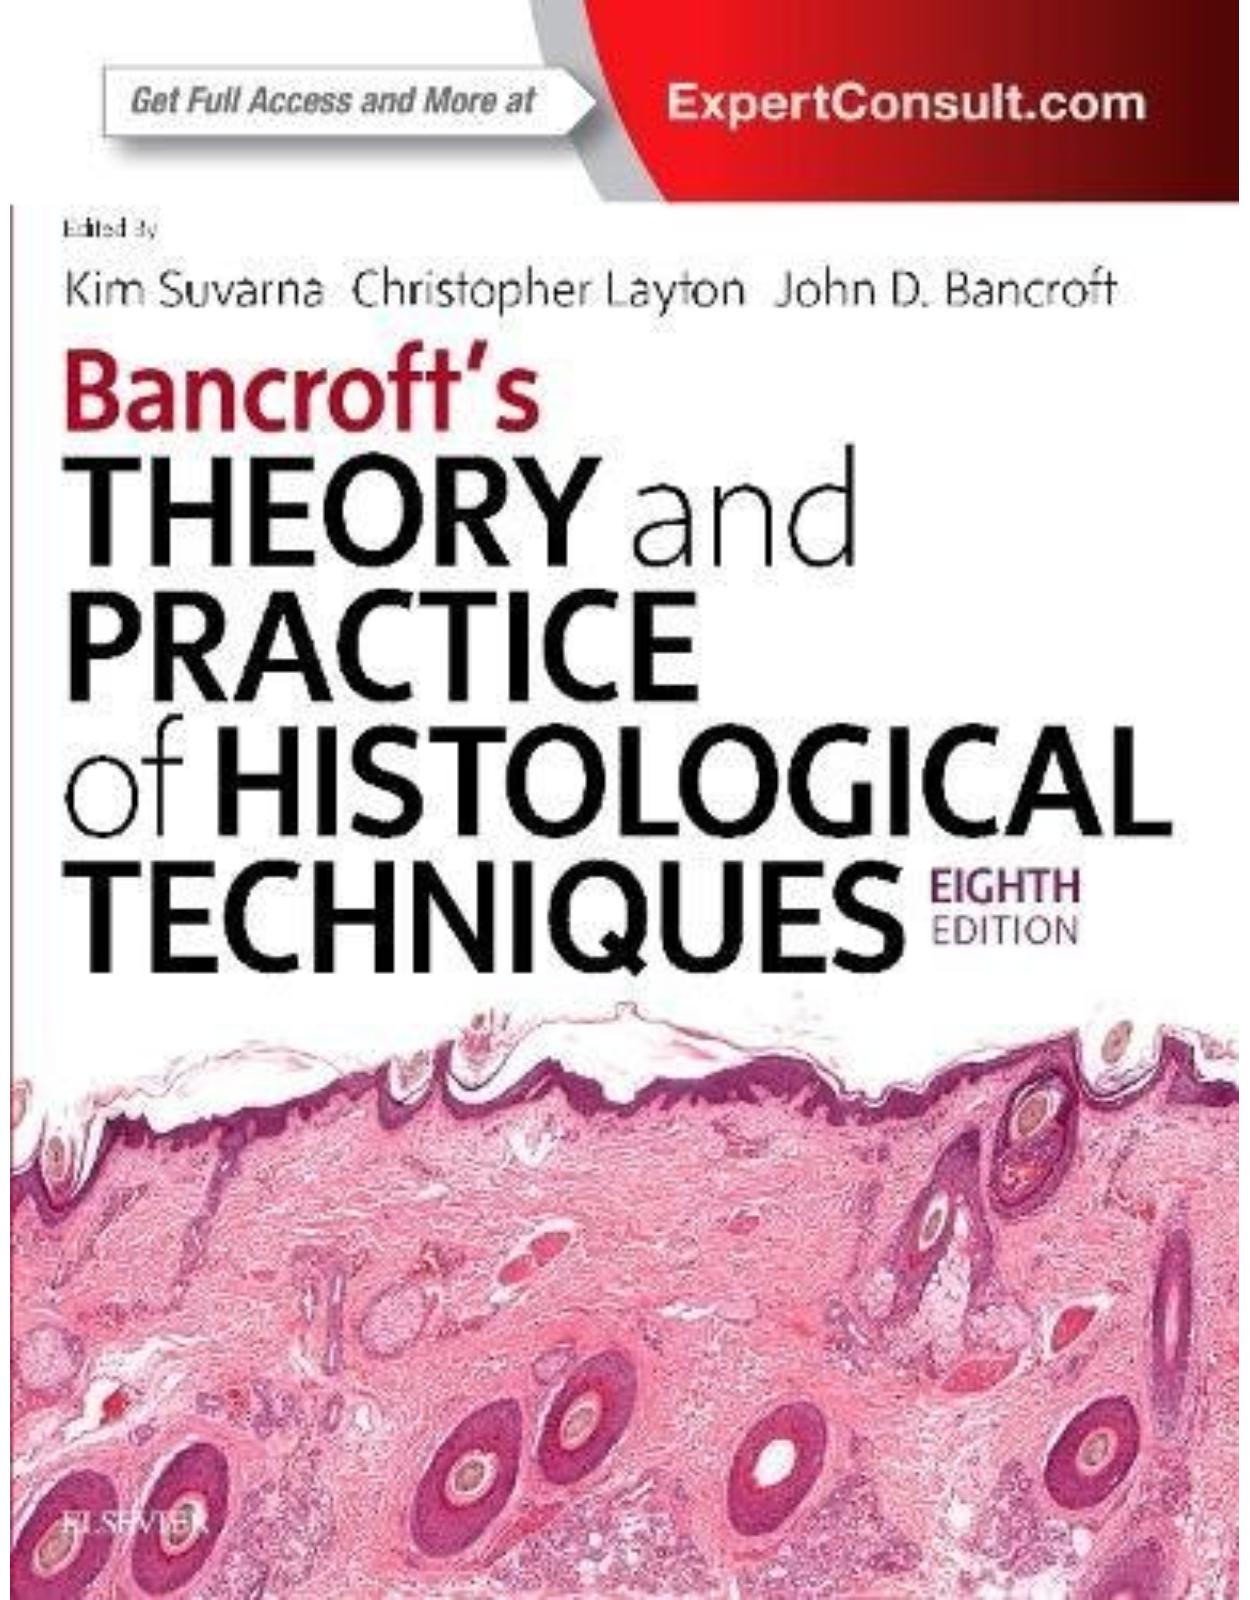 Bancroft's Theory and Practice of Histological Techniques, 8th Edition